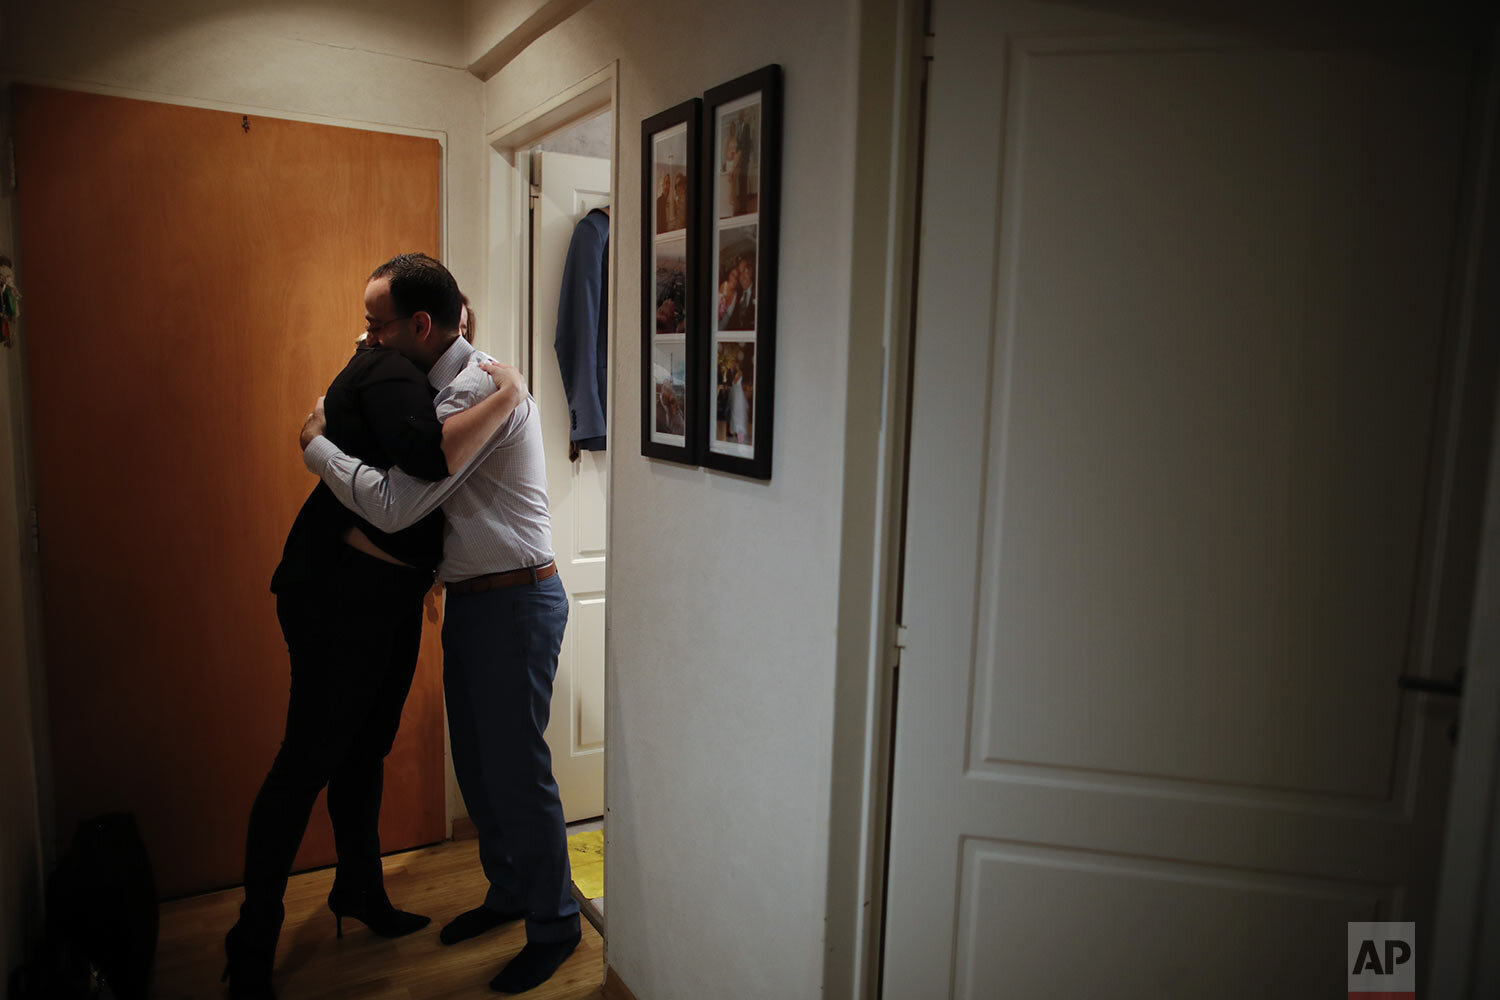  Dr. Matias Norte embraces his wife Silvina in a hallway of their apartment in the western suburbs of Buenos Aires, Argentina, Saturday, July 18, 2020, after a long day of treating COVID-19 patients but no kissing or hugging until after he has shower